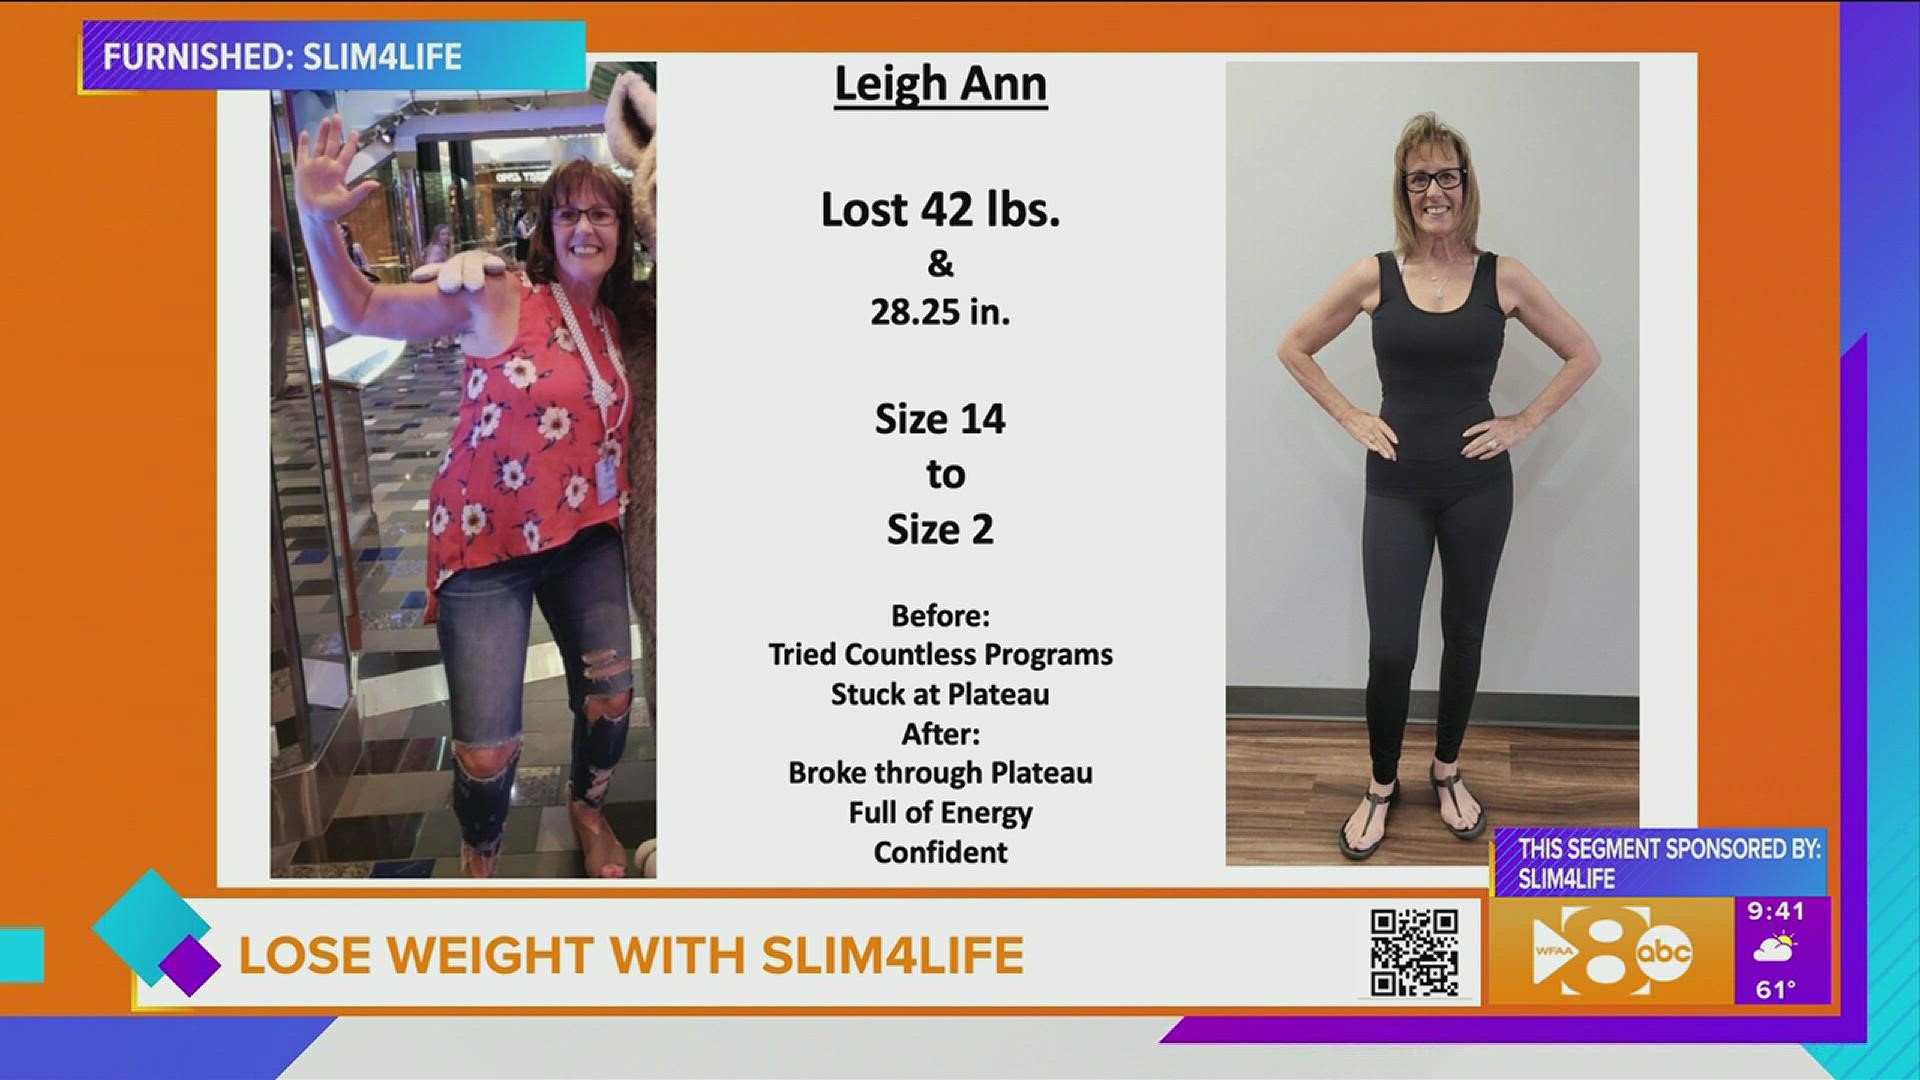 Find out how SLIM4Life can help you lose weight. This segment is sponsored by SLIM4Life. Call 833.SLIMTODAY or go to slim4life.com for more information.